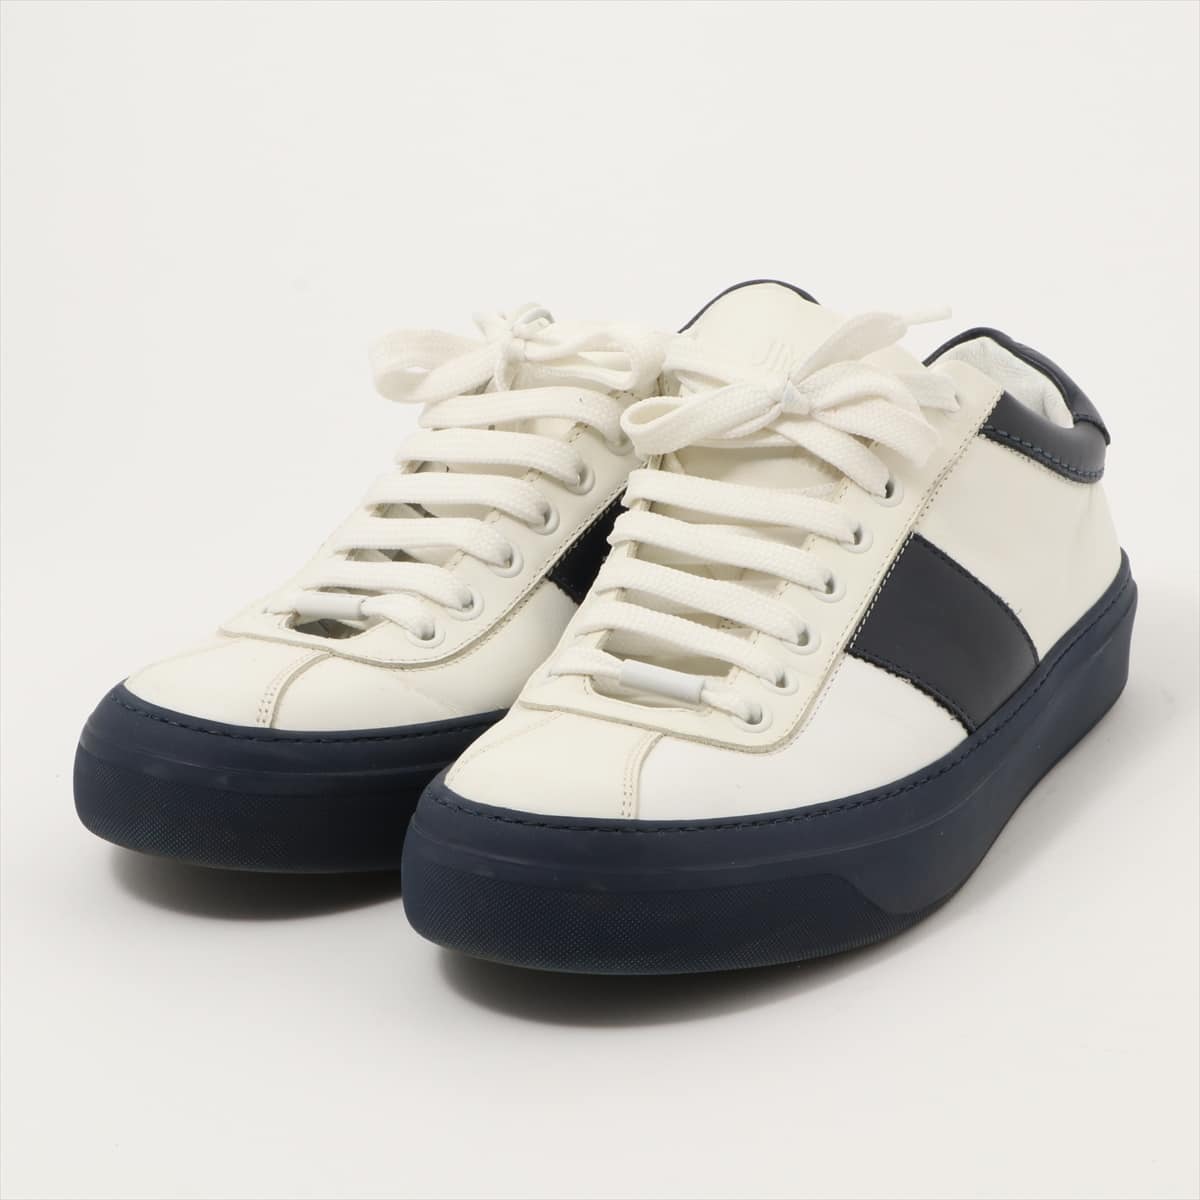 Jimmy Choo Leather Sneakers 41 Men's White x navy